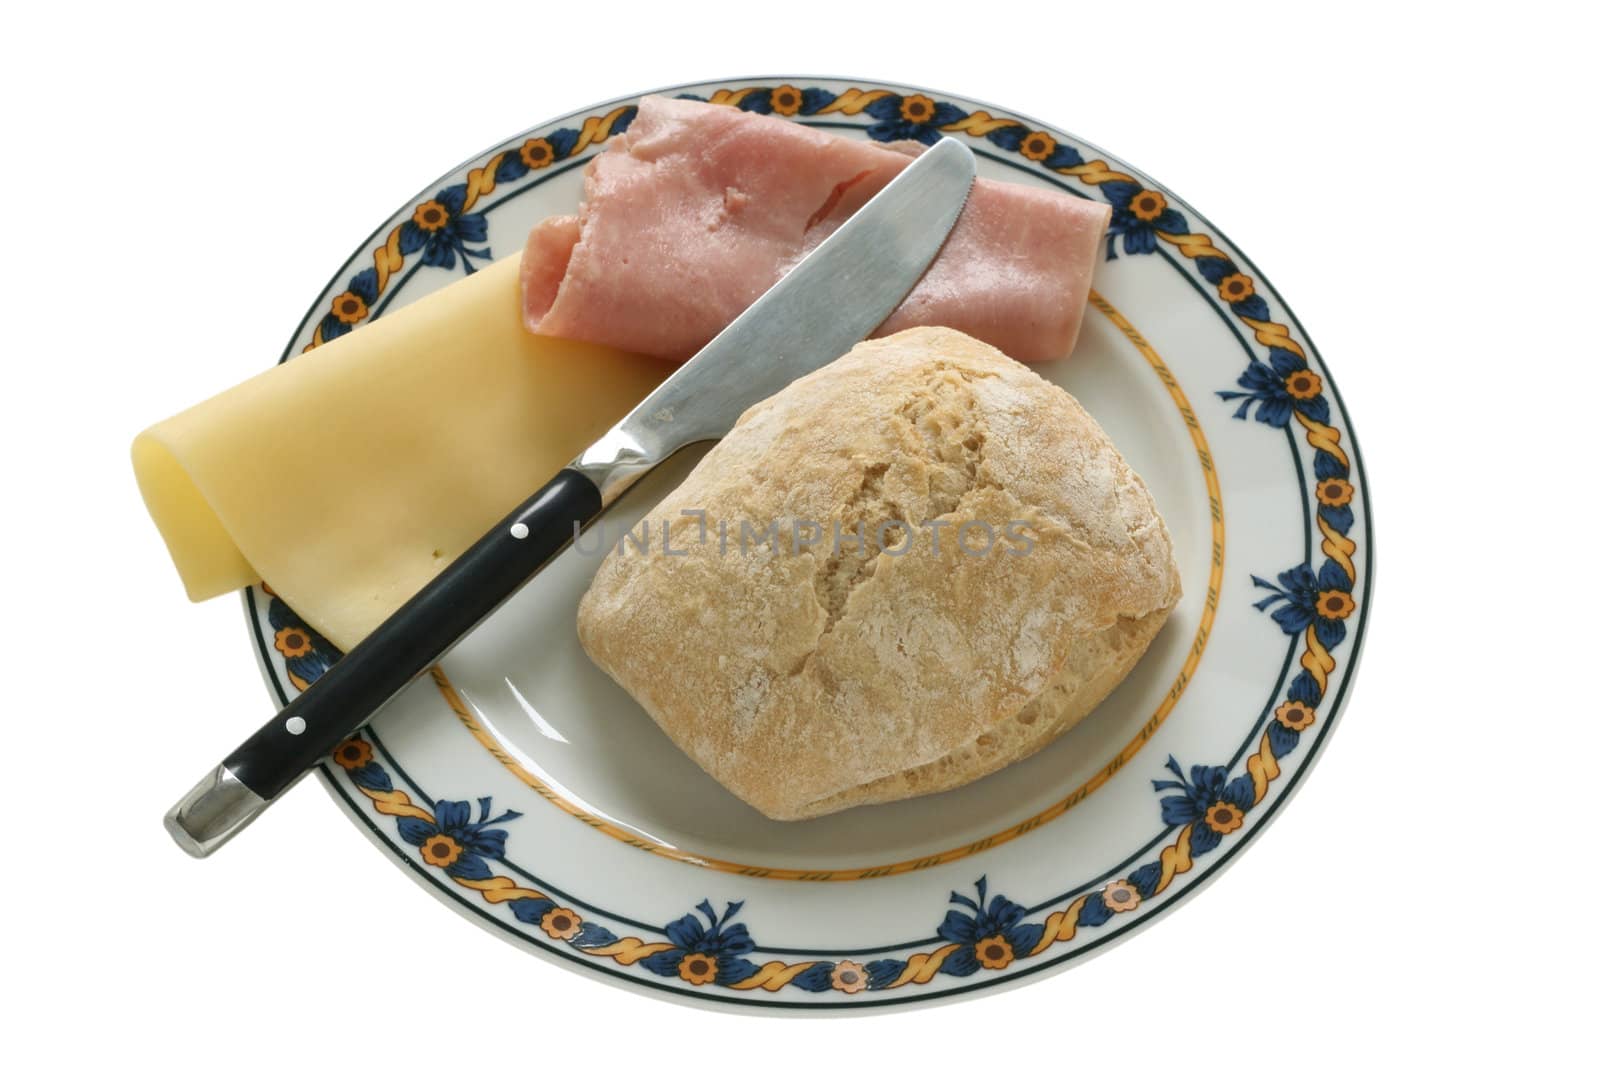 Bread with cheese and ham